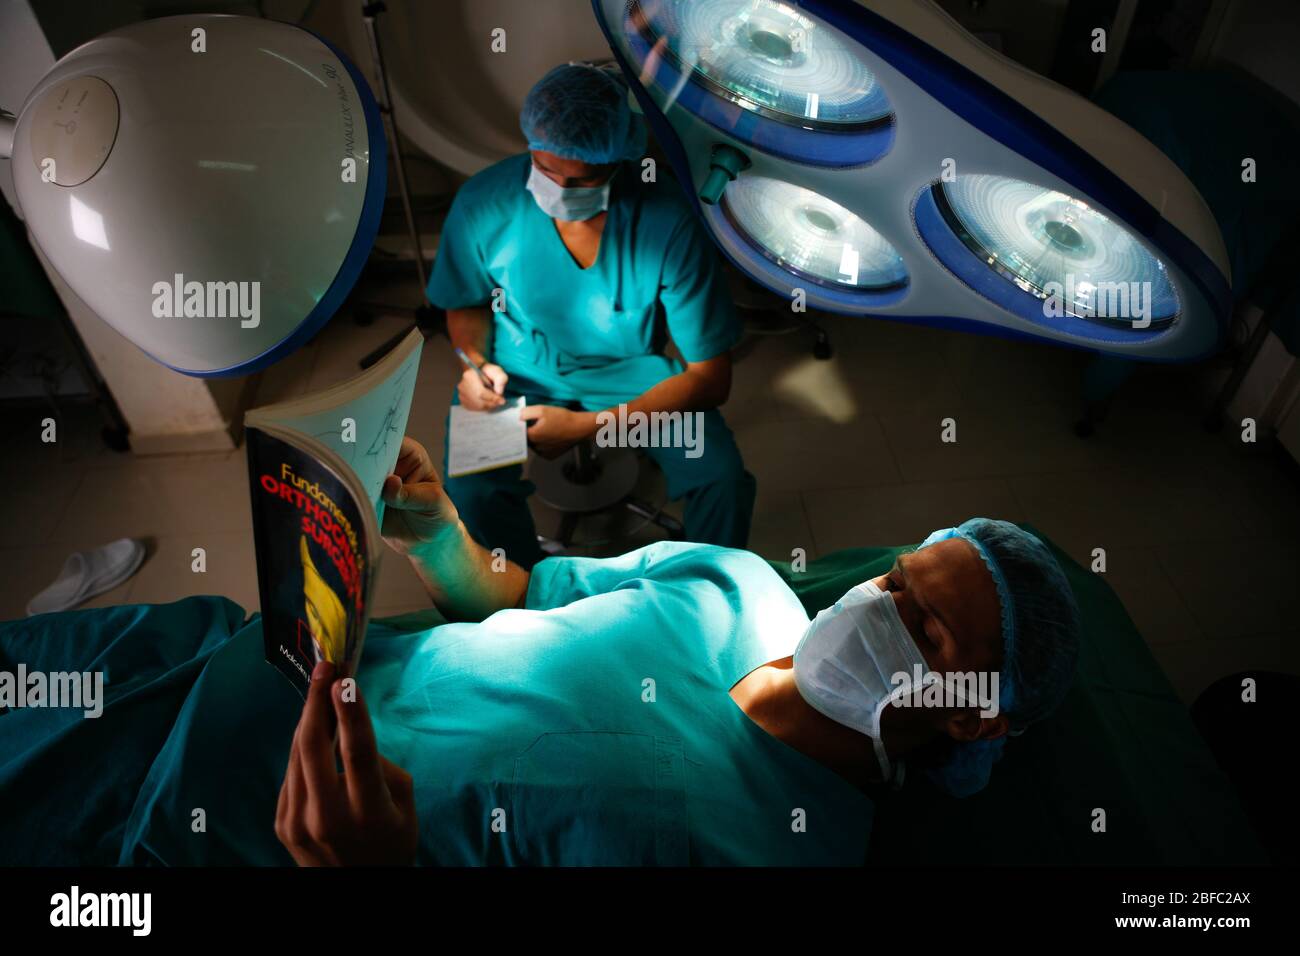 A surgeon reading a book whilst laying on an operating table. A second surgeon can be seen writing notes in the background. Stock Photo